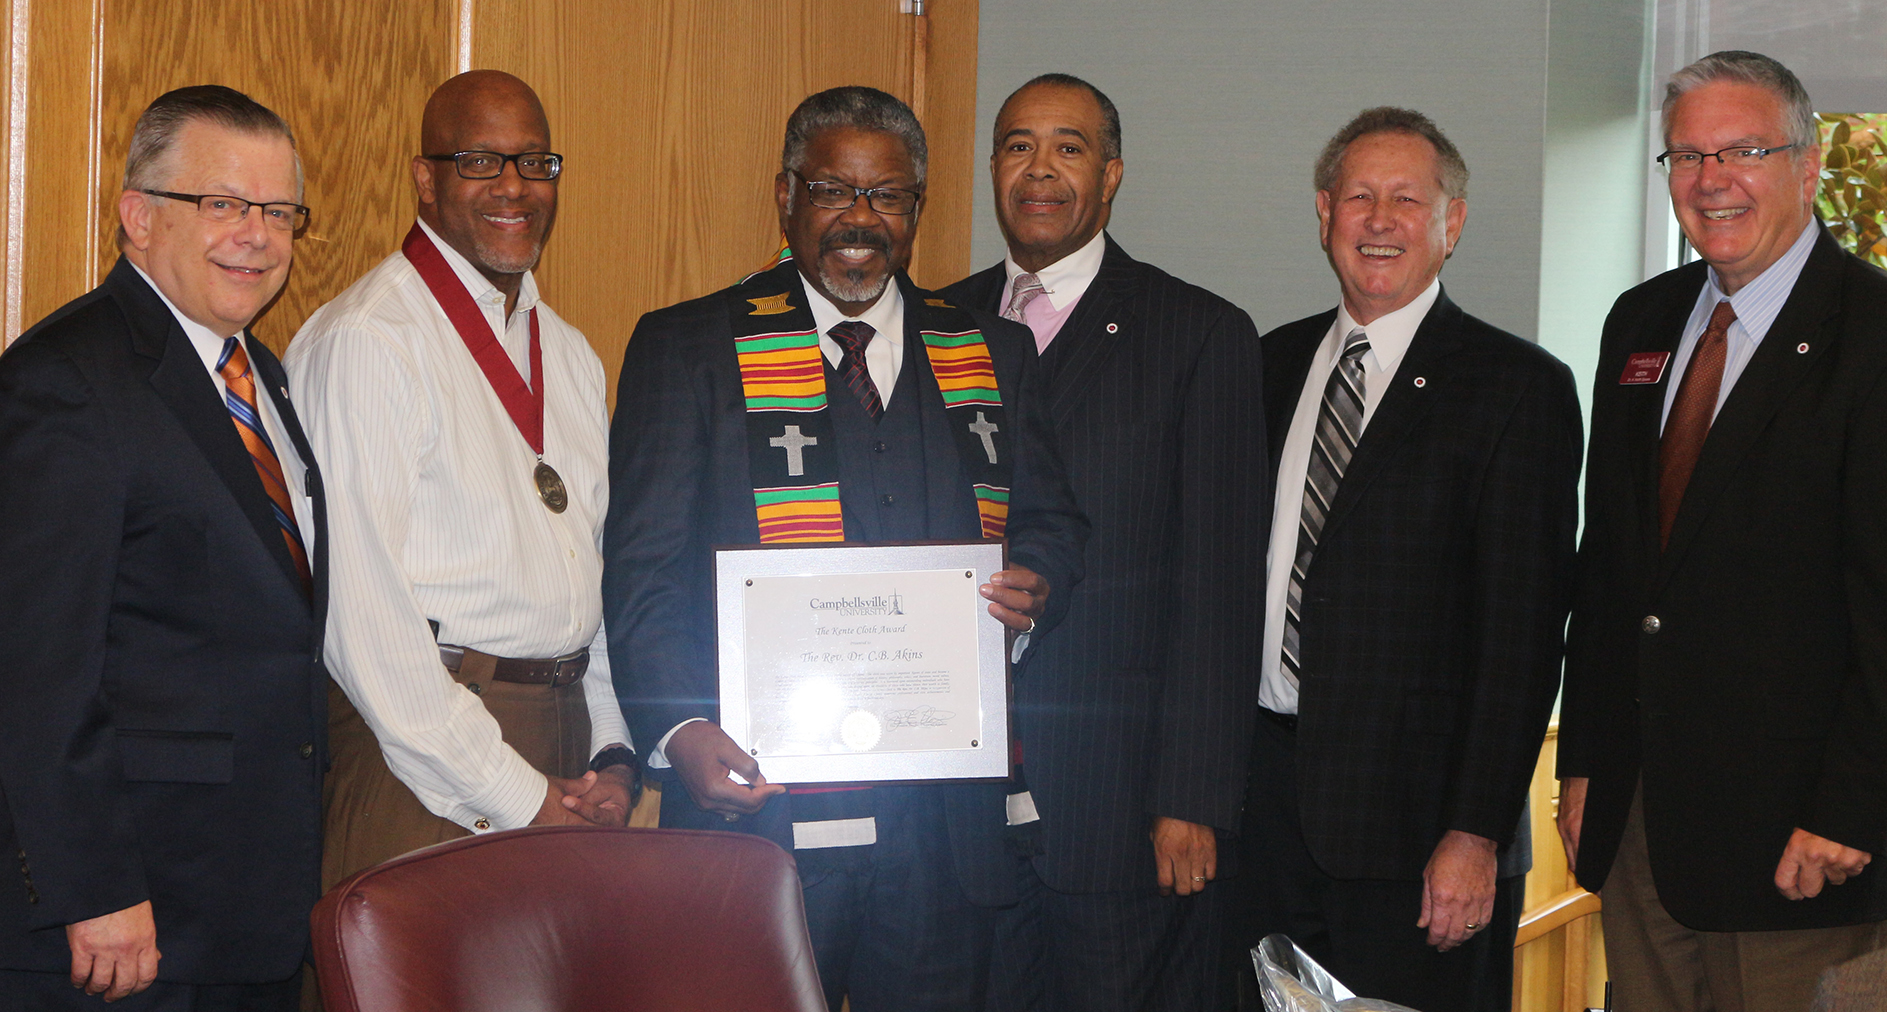 Campbellsville University's Kente Cloth award was presented to Dr. C.B. Akins, Sr., pastor of First Baptist Church Bracktown in Lexington, Ky. and moderator of the General Association of Baptists in Kentucky, for his servant leadership. From left: Dr. John Chowning, vice president for Church and External Relations and executive assistant to the president; Dr. Stephen J. Thurston, senior pastor of New Covenant Missionary Baptist Church in Chicago, Ill.; Akins; Dr. Joseph Owens, chair of CU's Board of Trustees; Dr. Frank Cheatham, senior vice president for Academic Affairs; and Dr. Keith Spears, vice president for Graduate and Professional Studies. (Campbellsville University Photo by Drew Tucker)